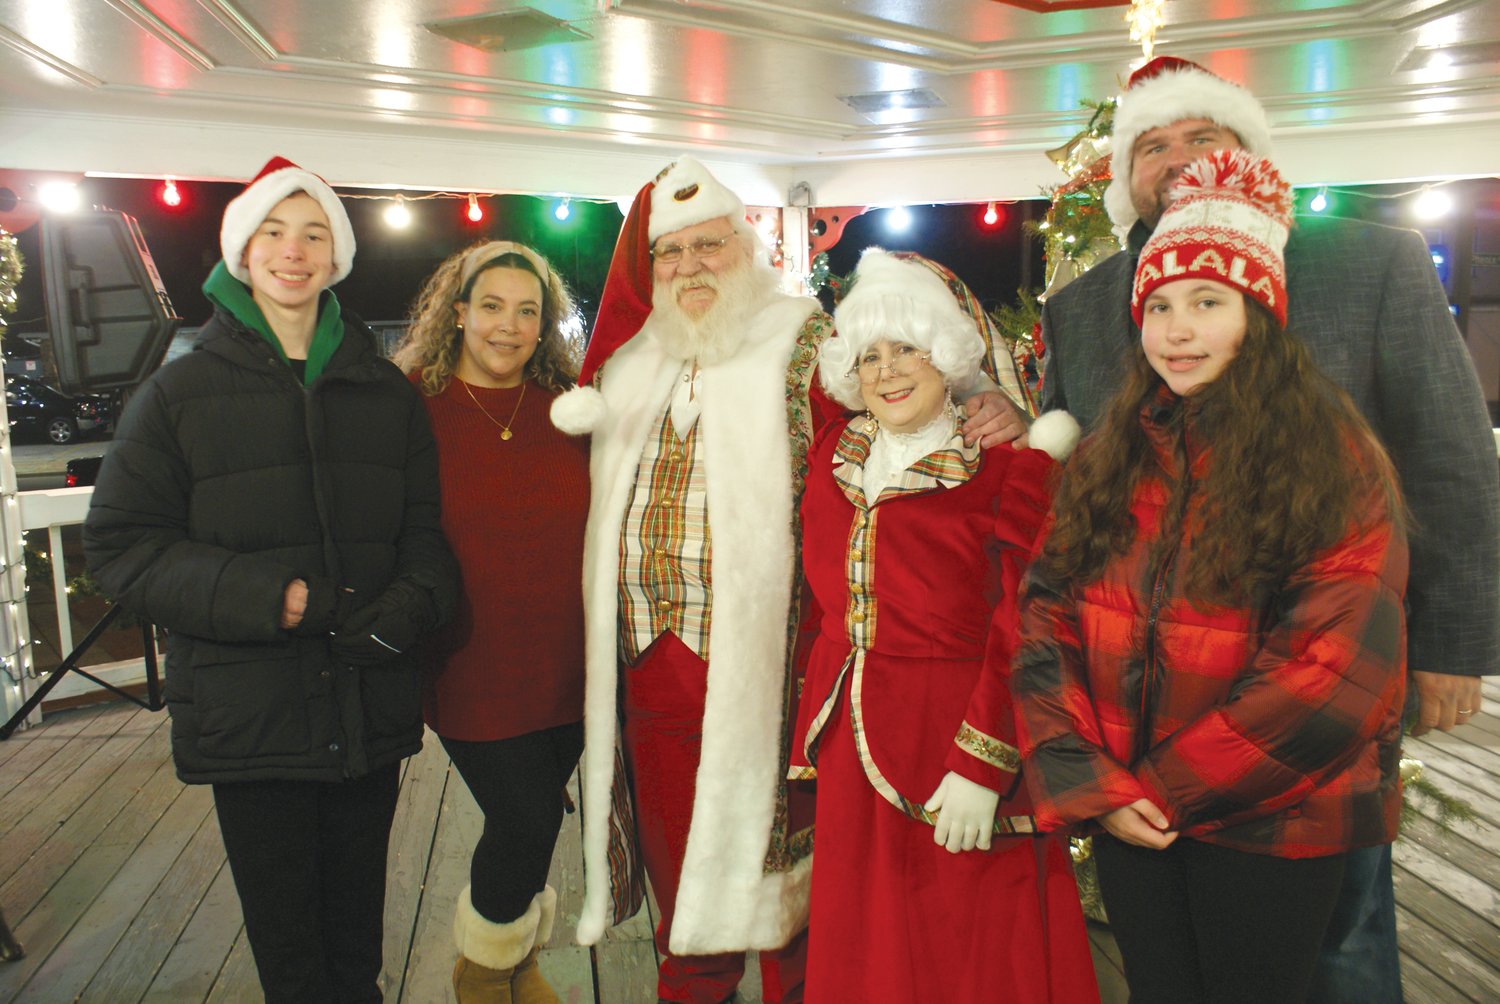 FAMILY TRADITION: The Knightsville Tree and Gazebo, hosted
by City Council President Chris Paplauskas, has become a
family traditions. Enjoying some time with Mr. & Mrs. Claus is
the Paplauskas Family - Aidan, 14, Judy, Chris and Sophia, 12.